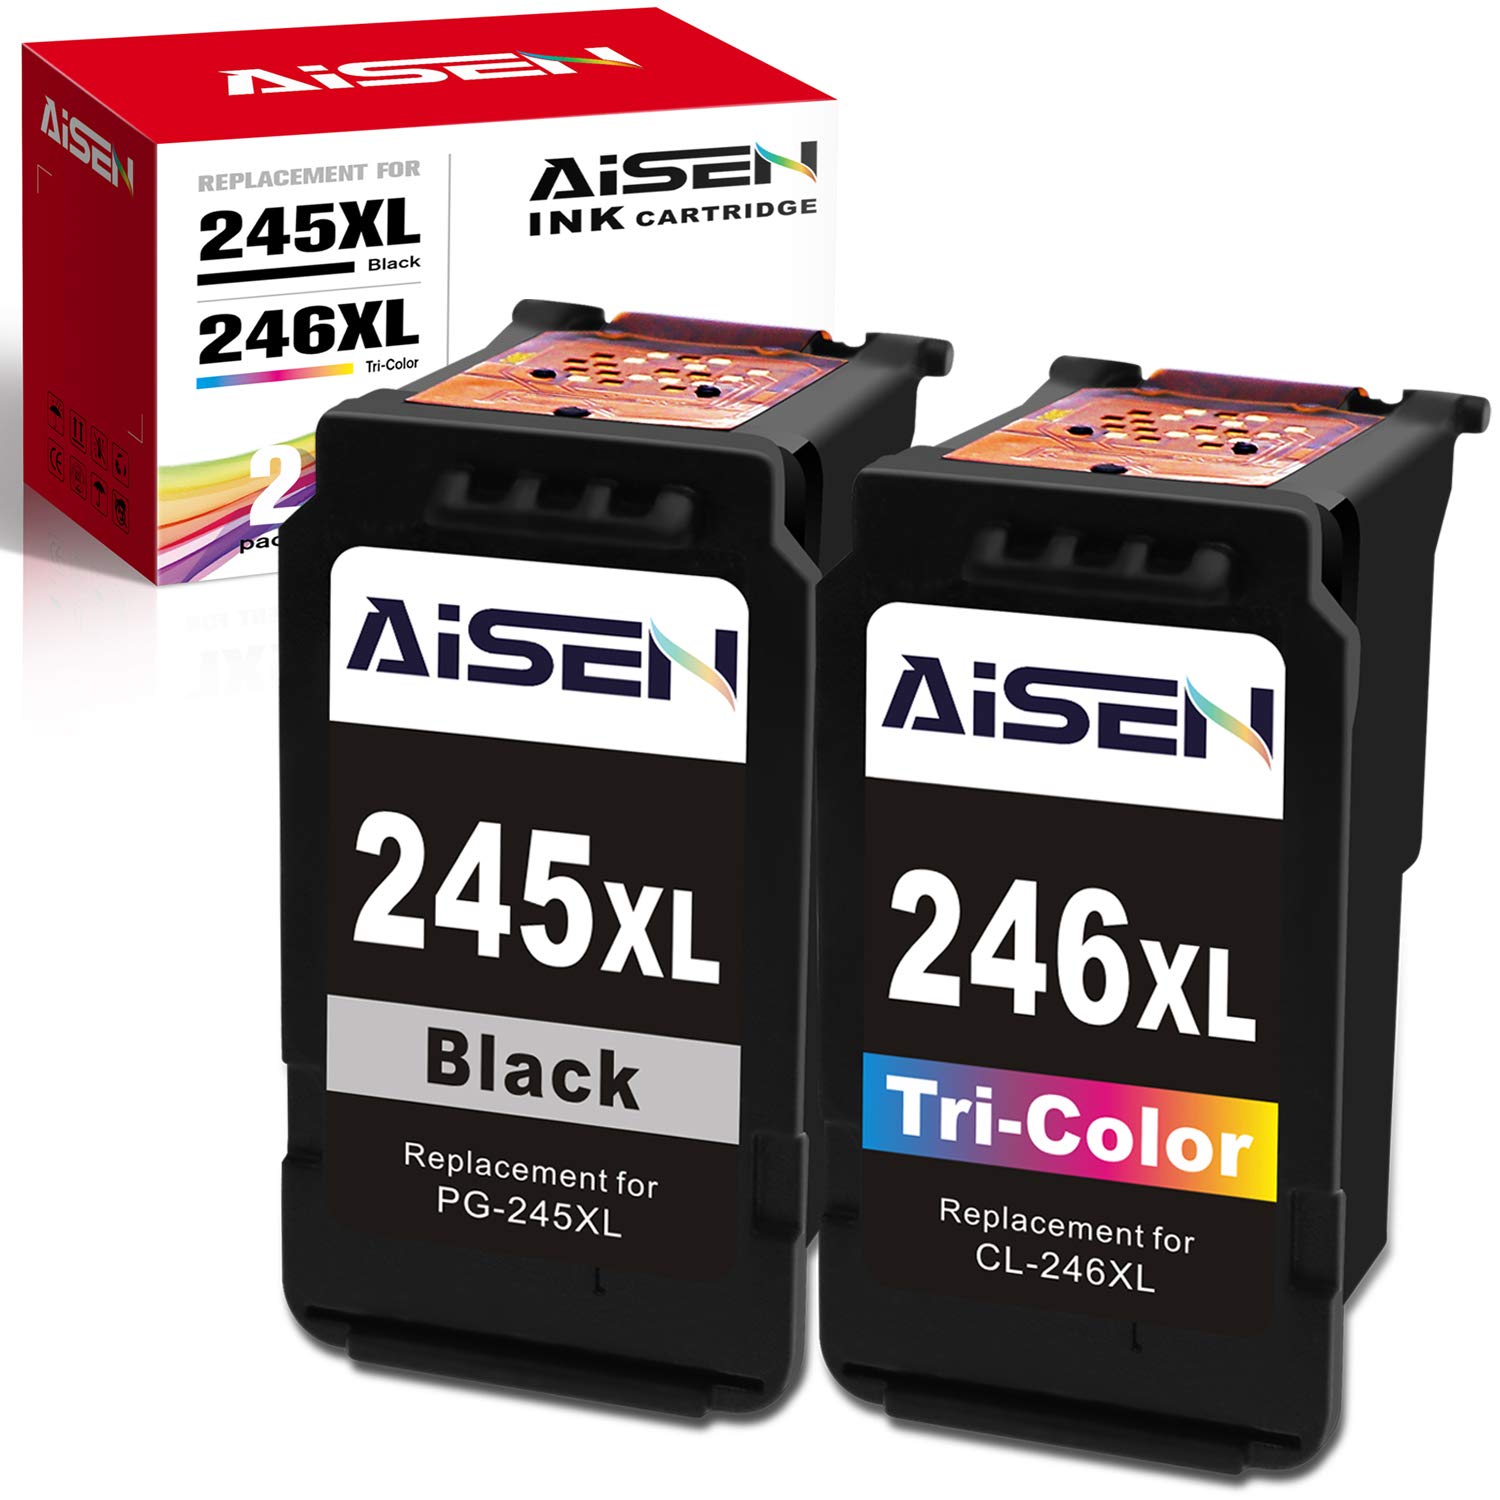 AISEN Remanufactured Canon Ink Cartridges 245 and 246 Replacement